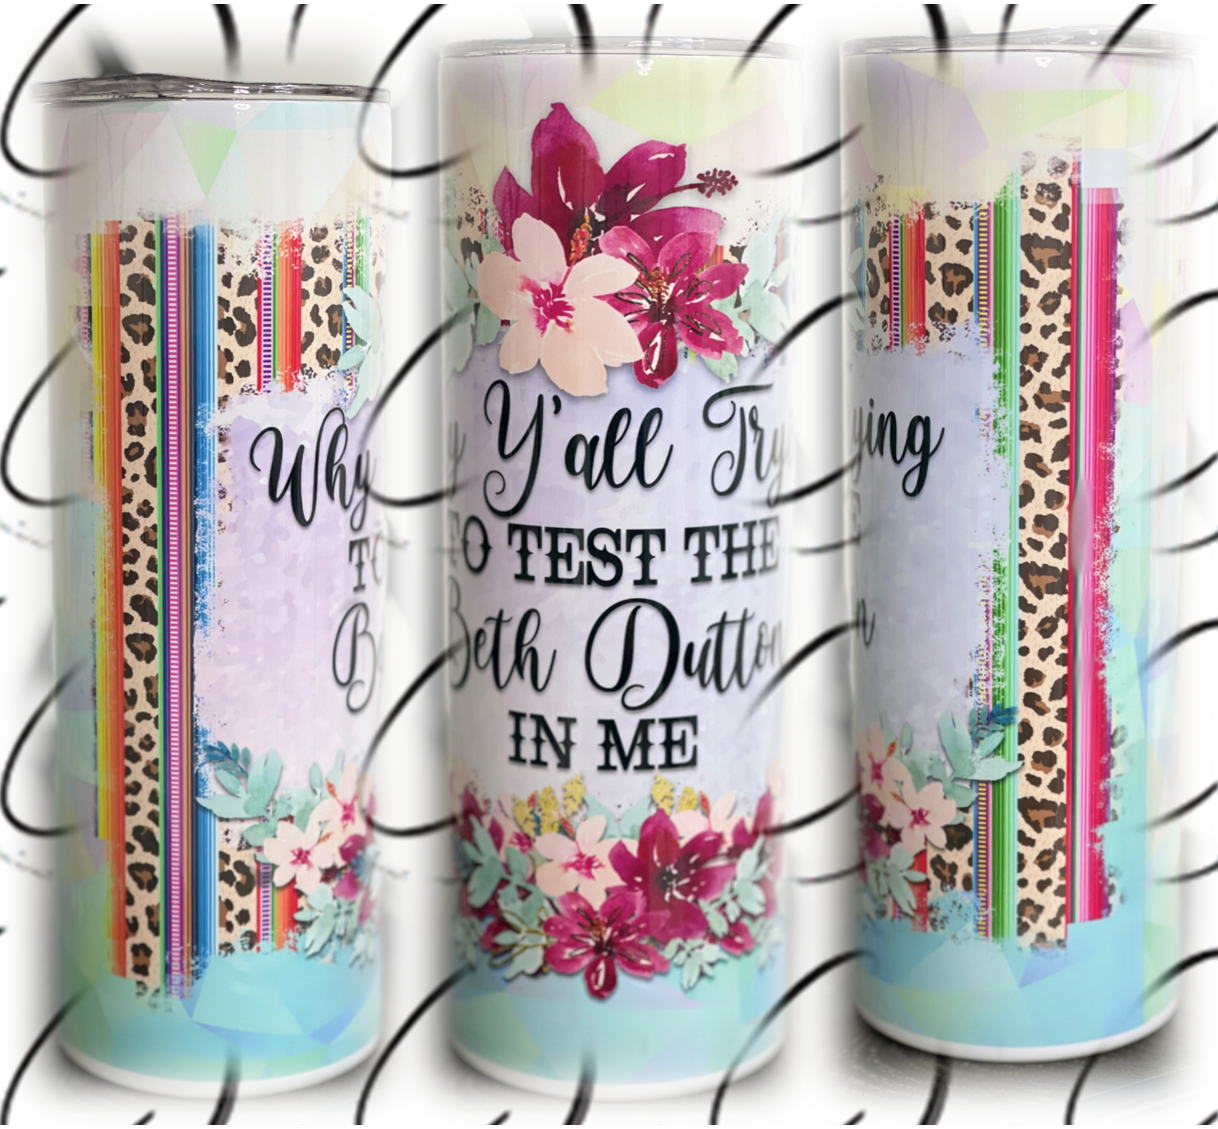 Test The Beth Dutton In Me 20oz Skinny Tumbler